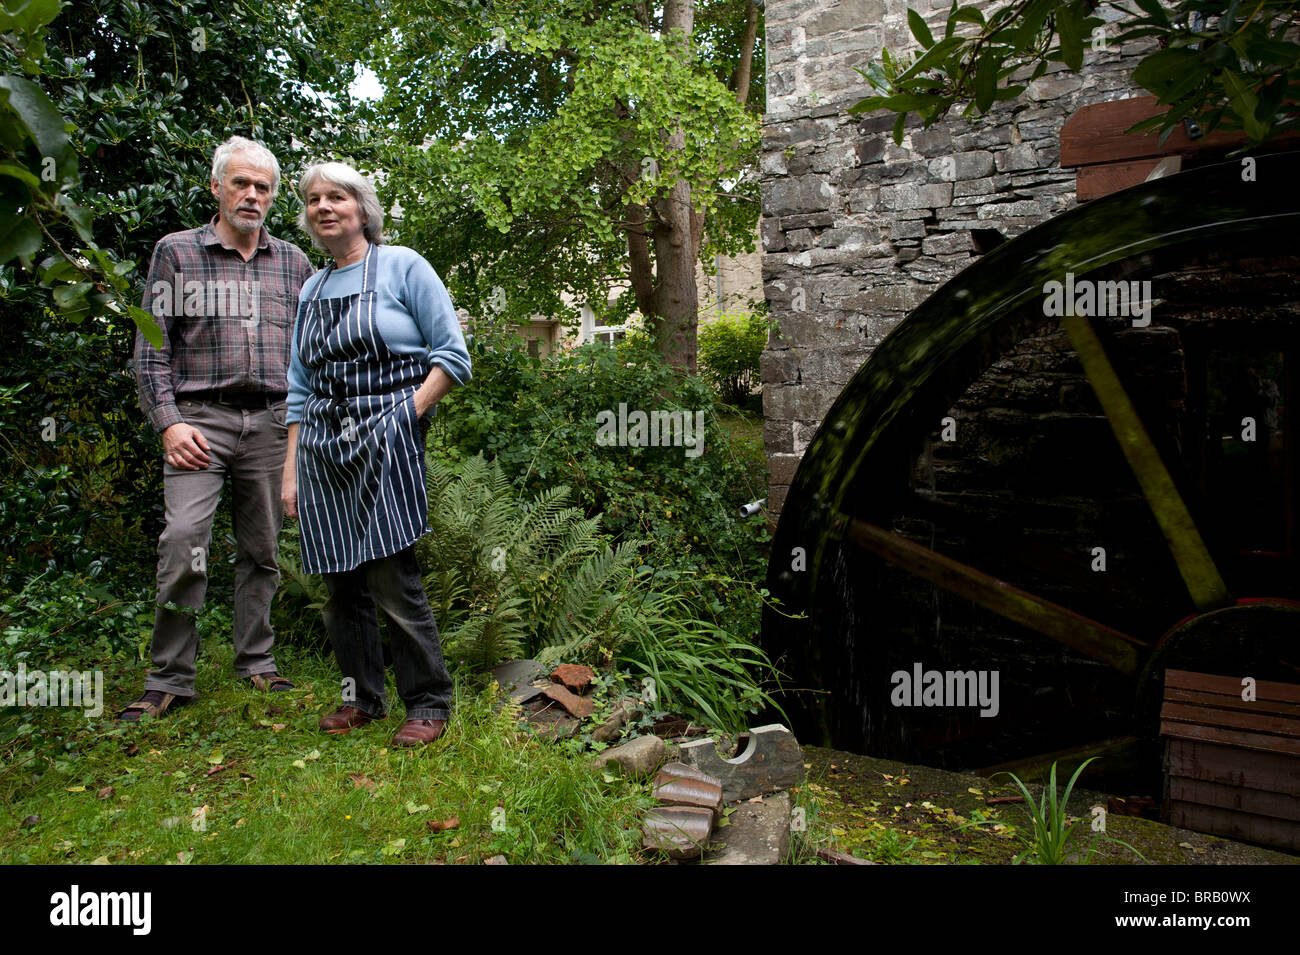 Andrew and Anne Parry at Felin Ganol Watermill. Llanrhystud, Ceredigiopn., Wales UK - restored 19th century water mill Stock Photo